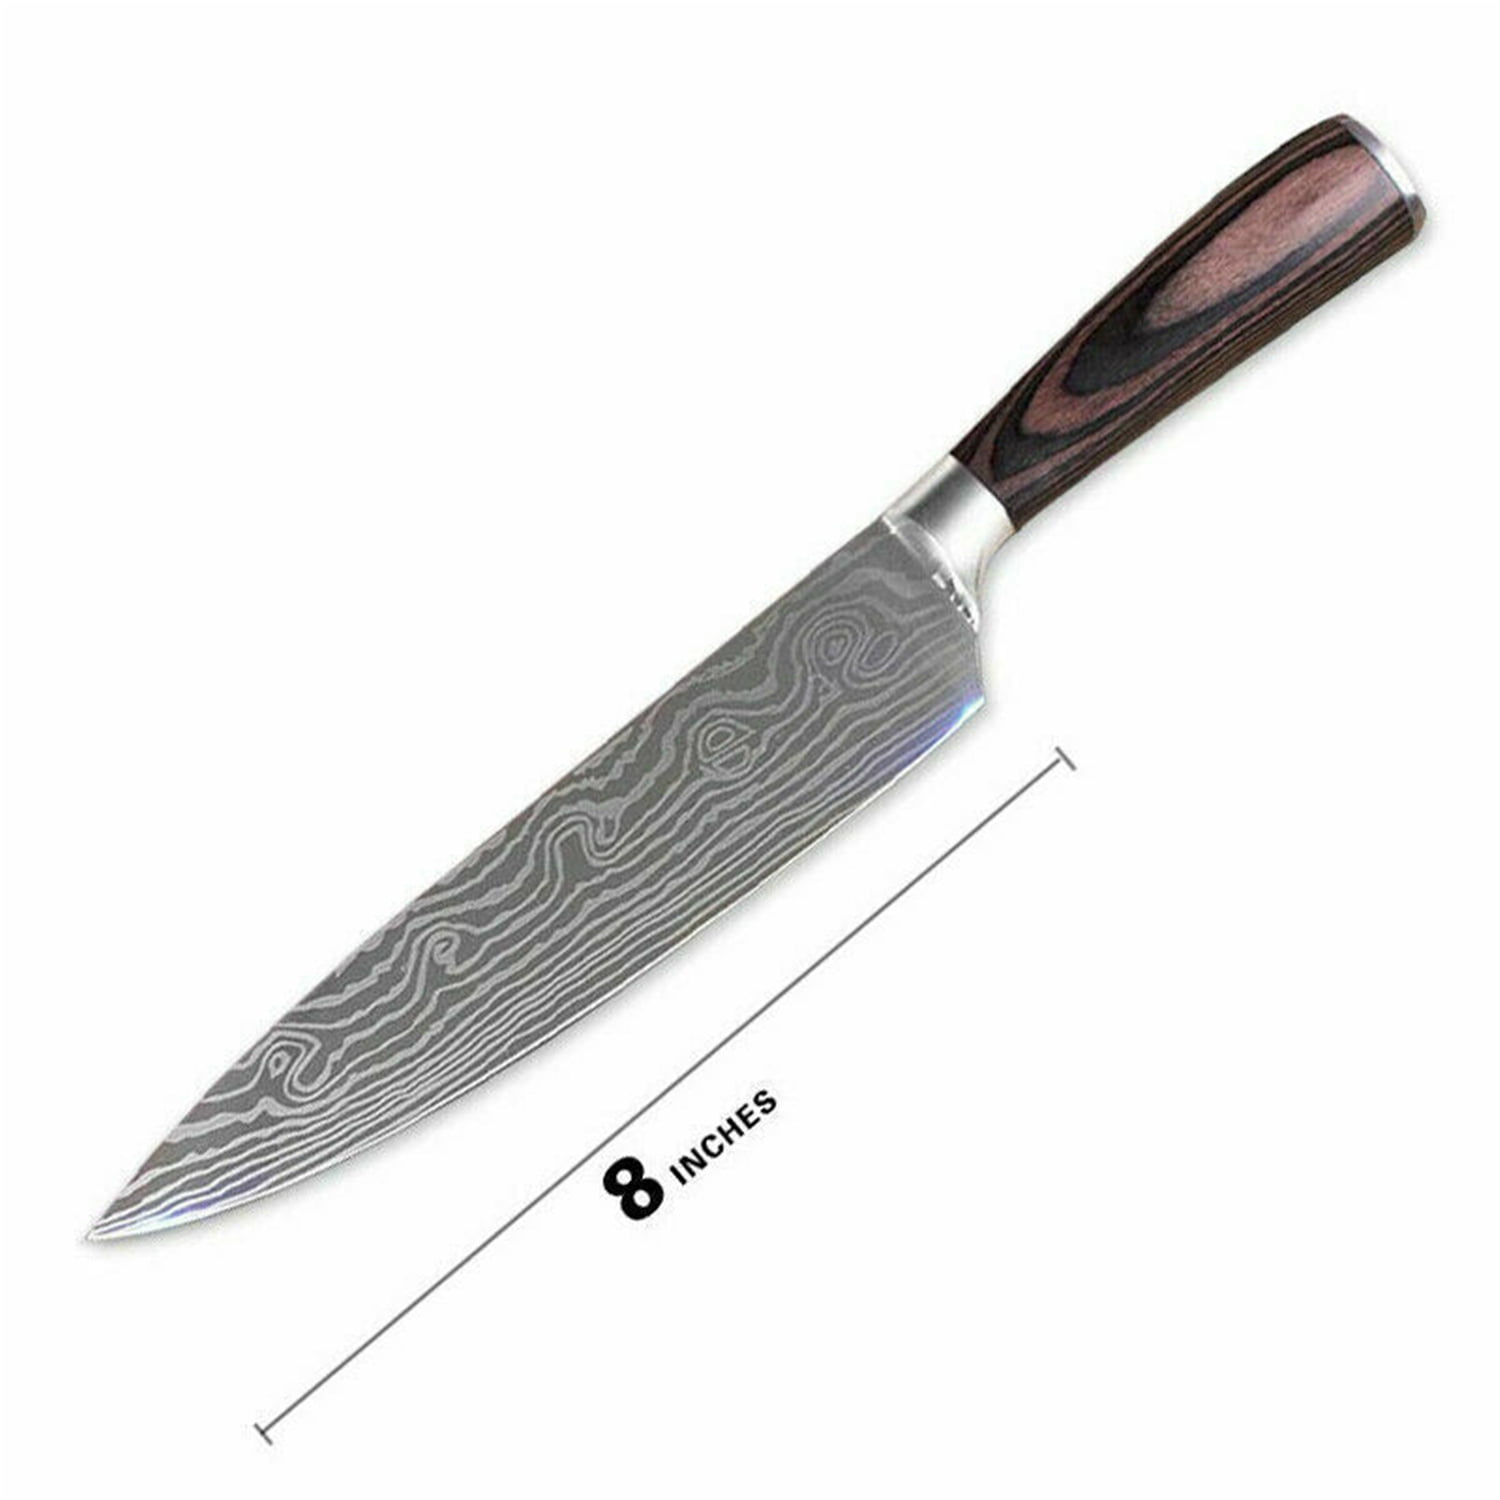 Mdhand 7 inch Kitchen Knives Laser Damascus Pattern Chef Knife Sharp Cleaver Slicing Utility Knives Tool